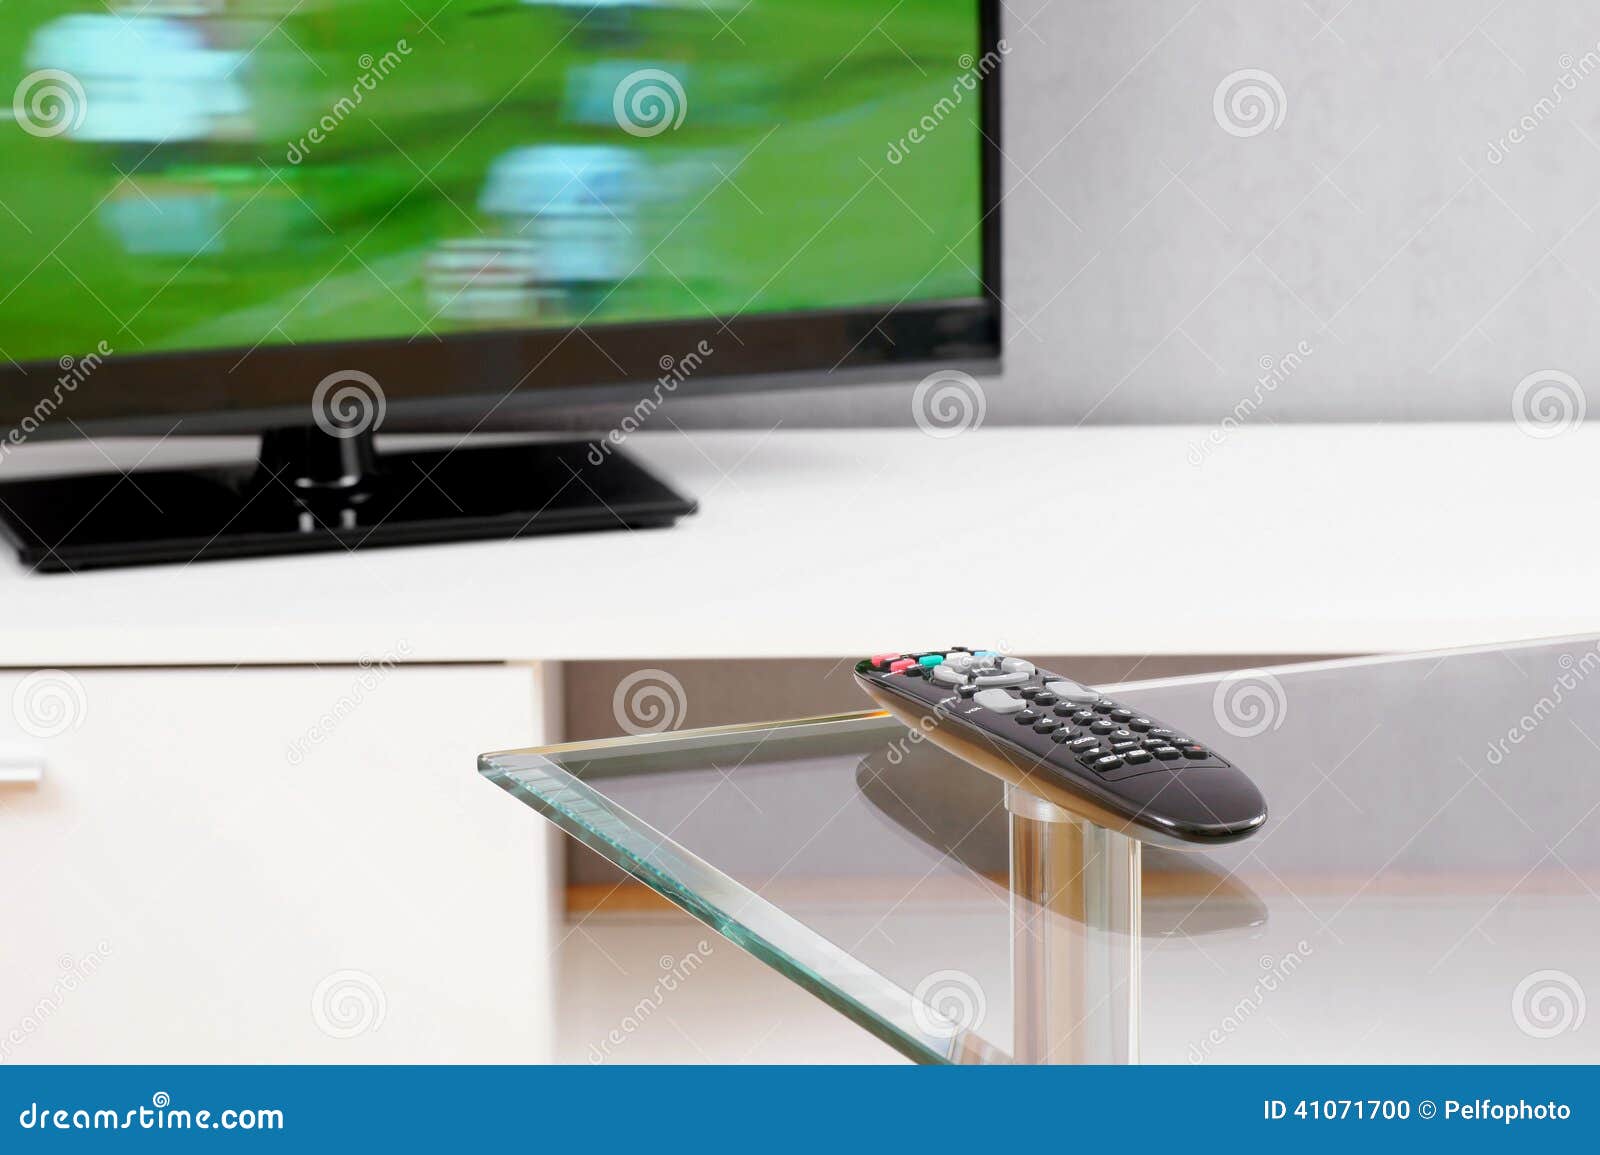 Television And Remote Control Stock Photo Image Of Button